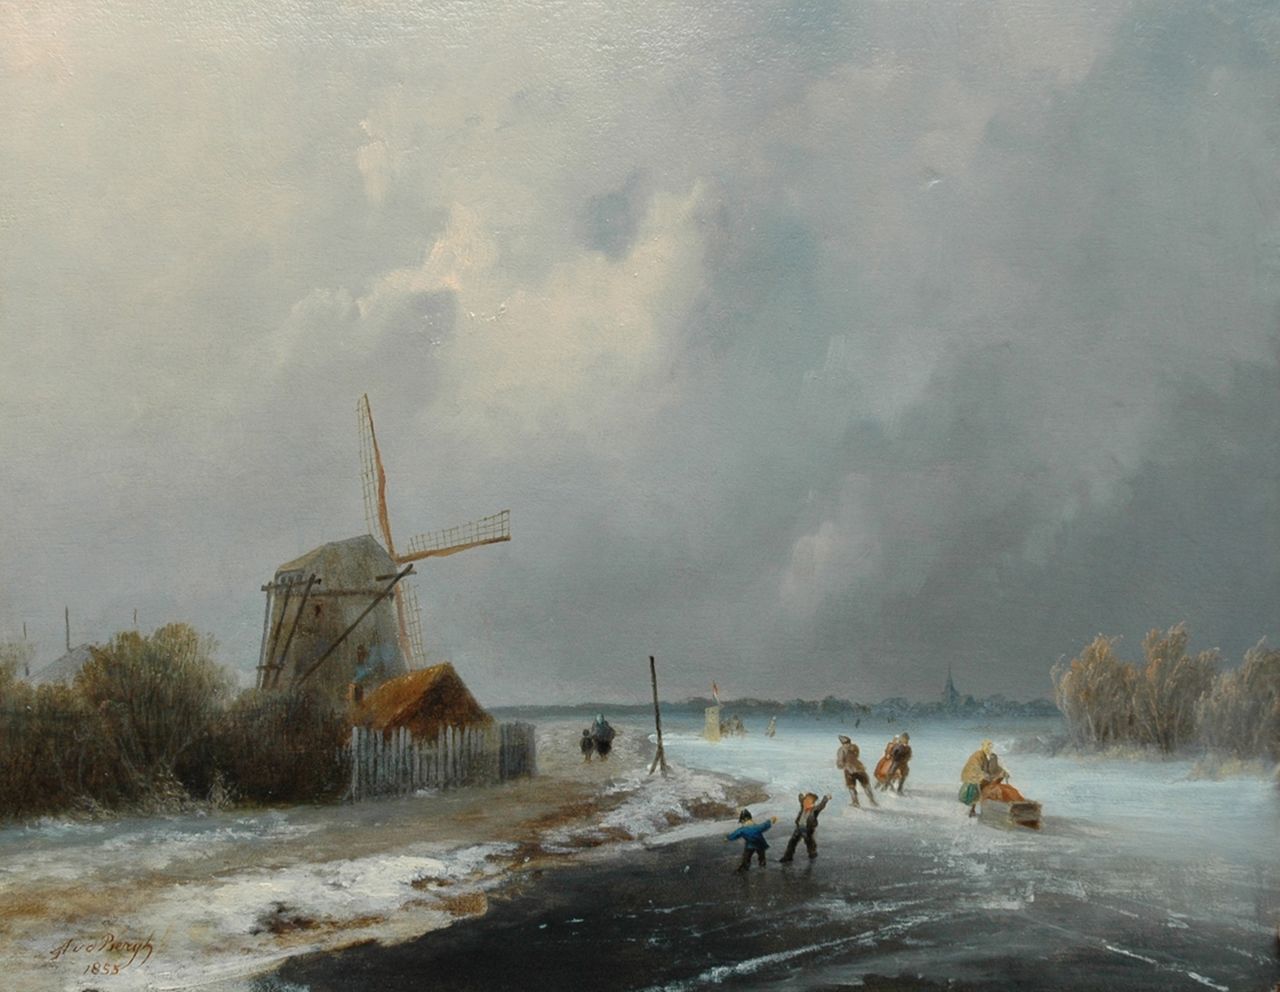 Andries van den Bergh | A winter scene with skaters near a windmill, oil on panel, 30.4 x 38.6 cm, signed l.l. and dated 1855